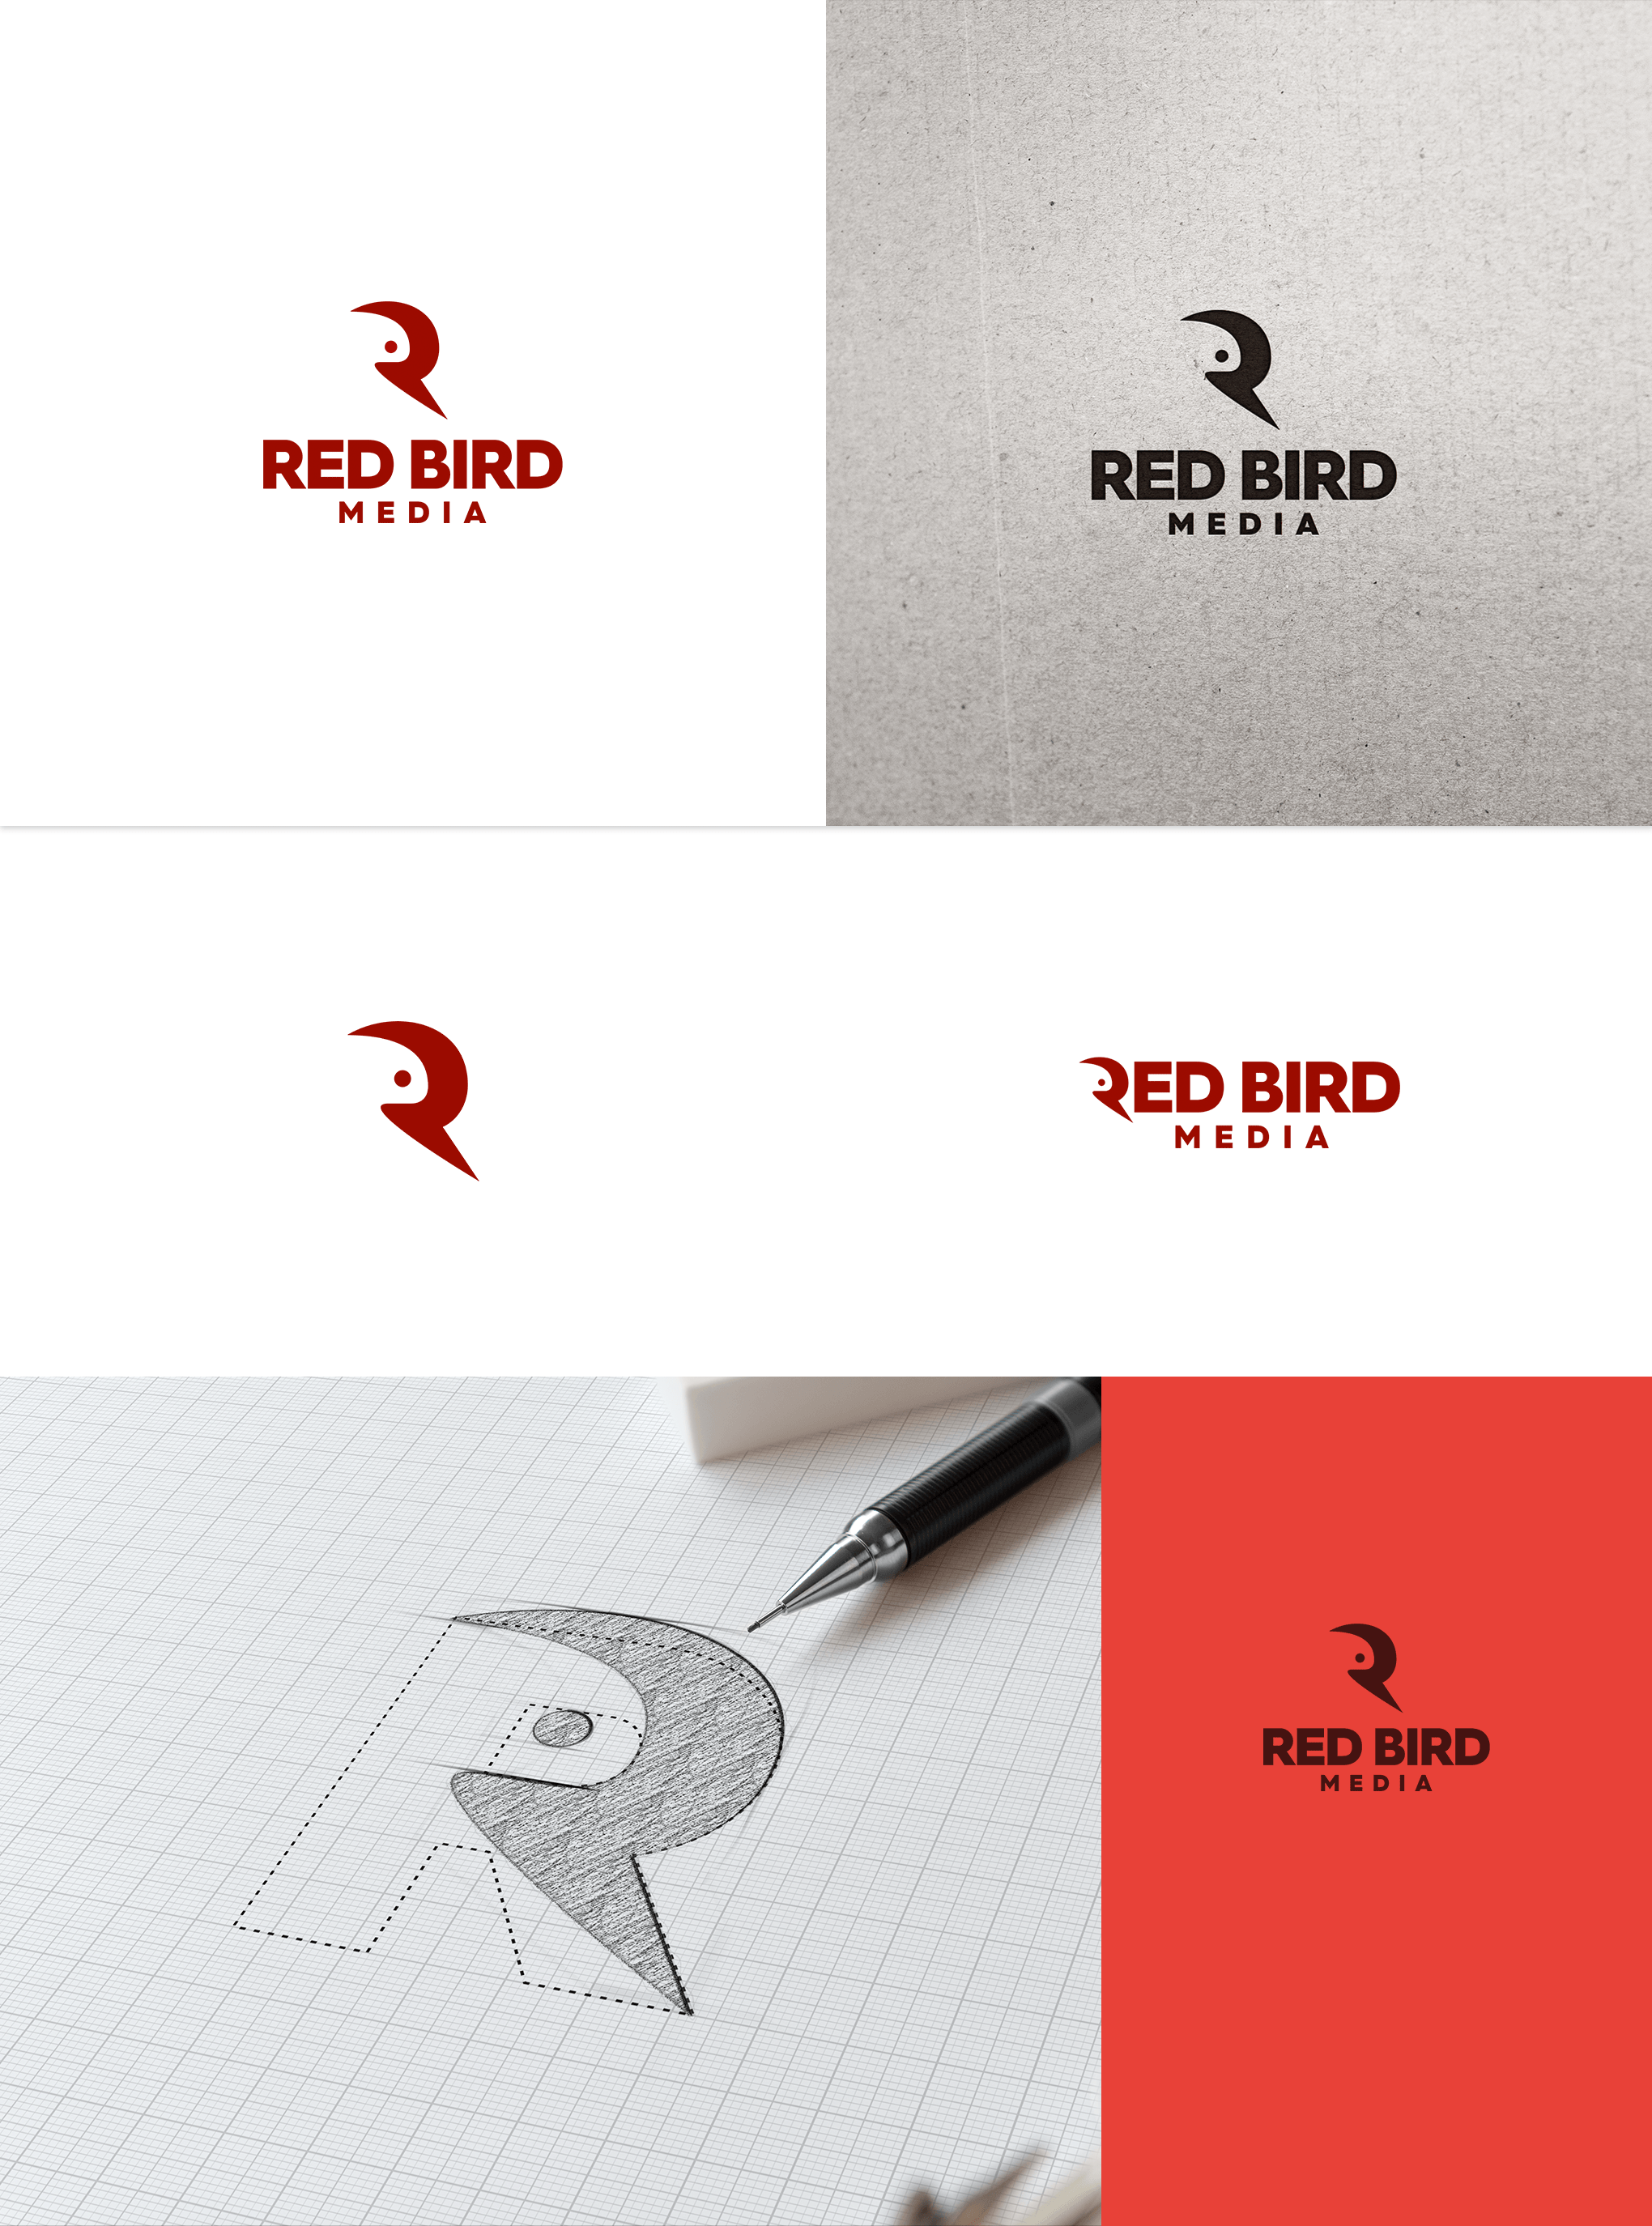 Entry Logo - Can I present multiple logo variations in a single Contest entry